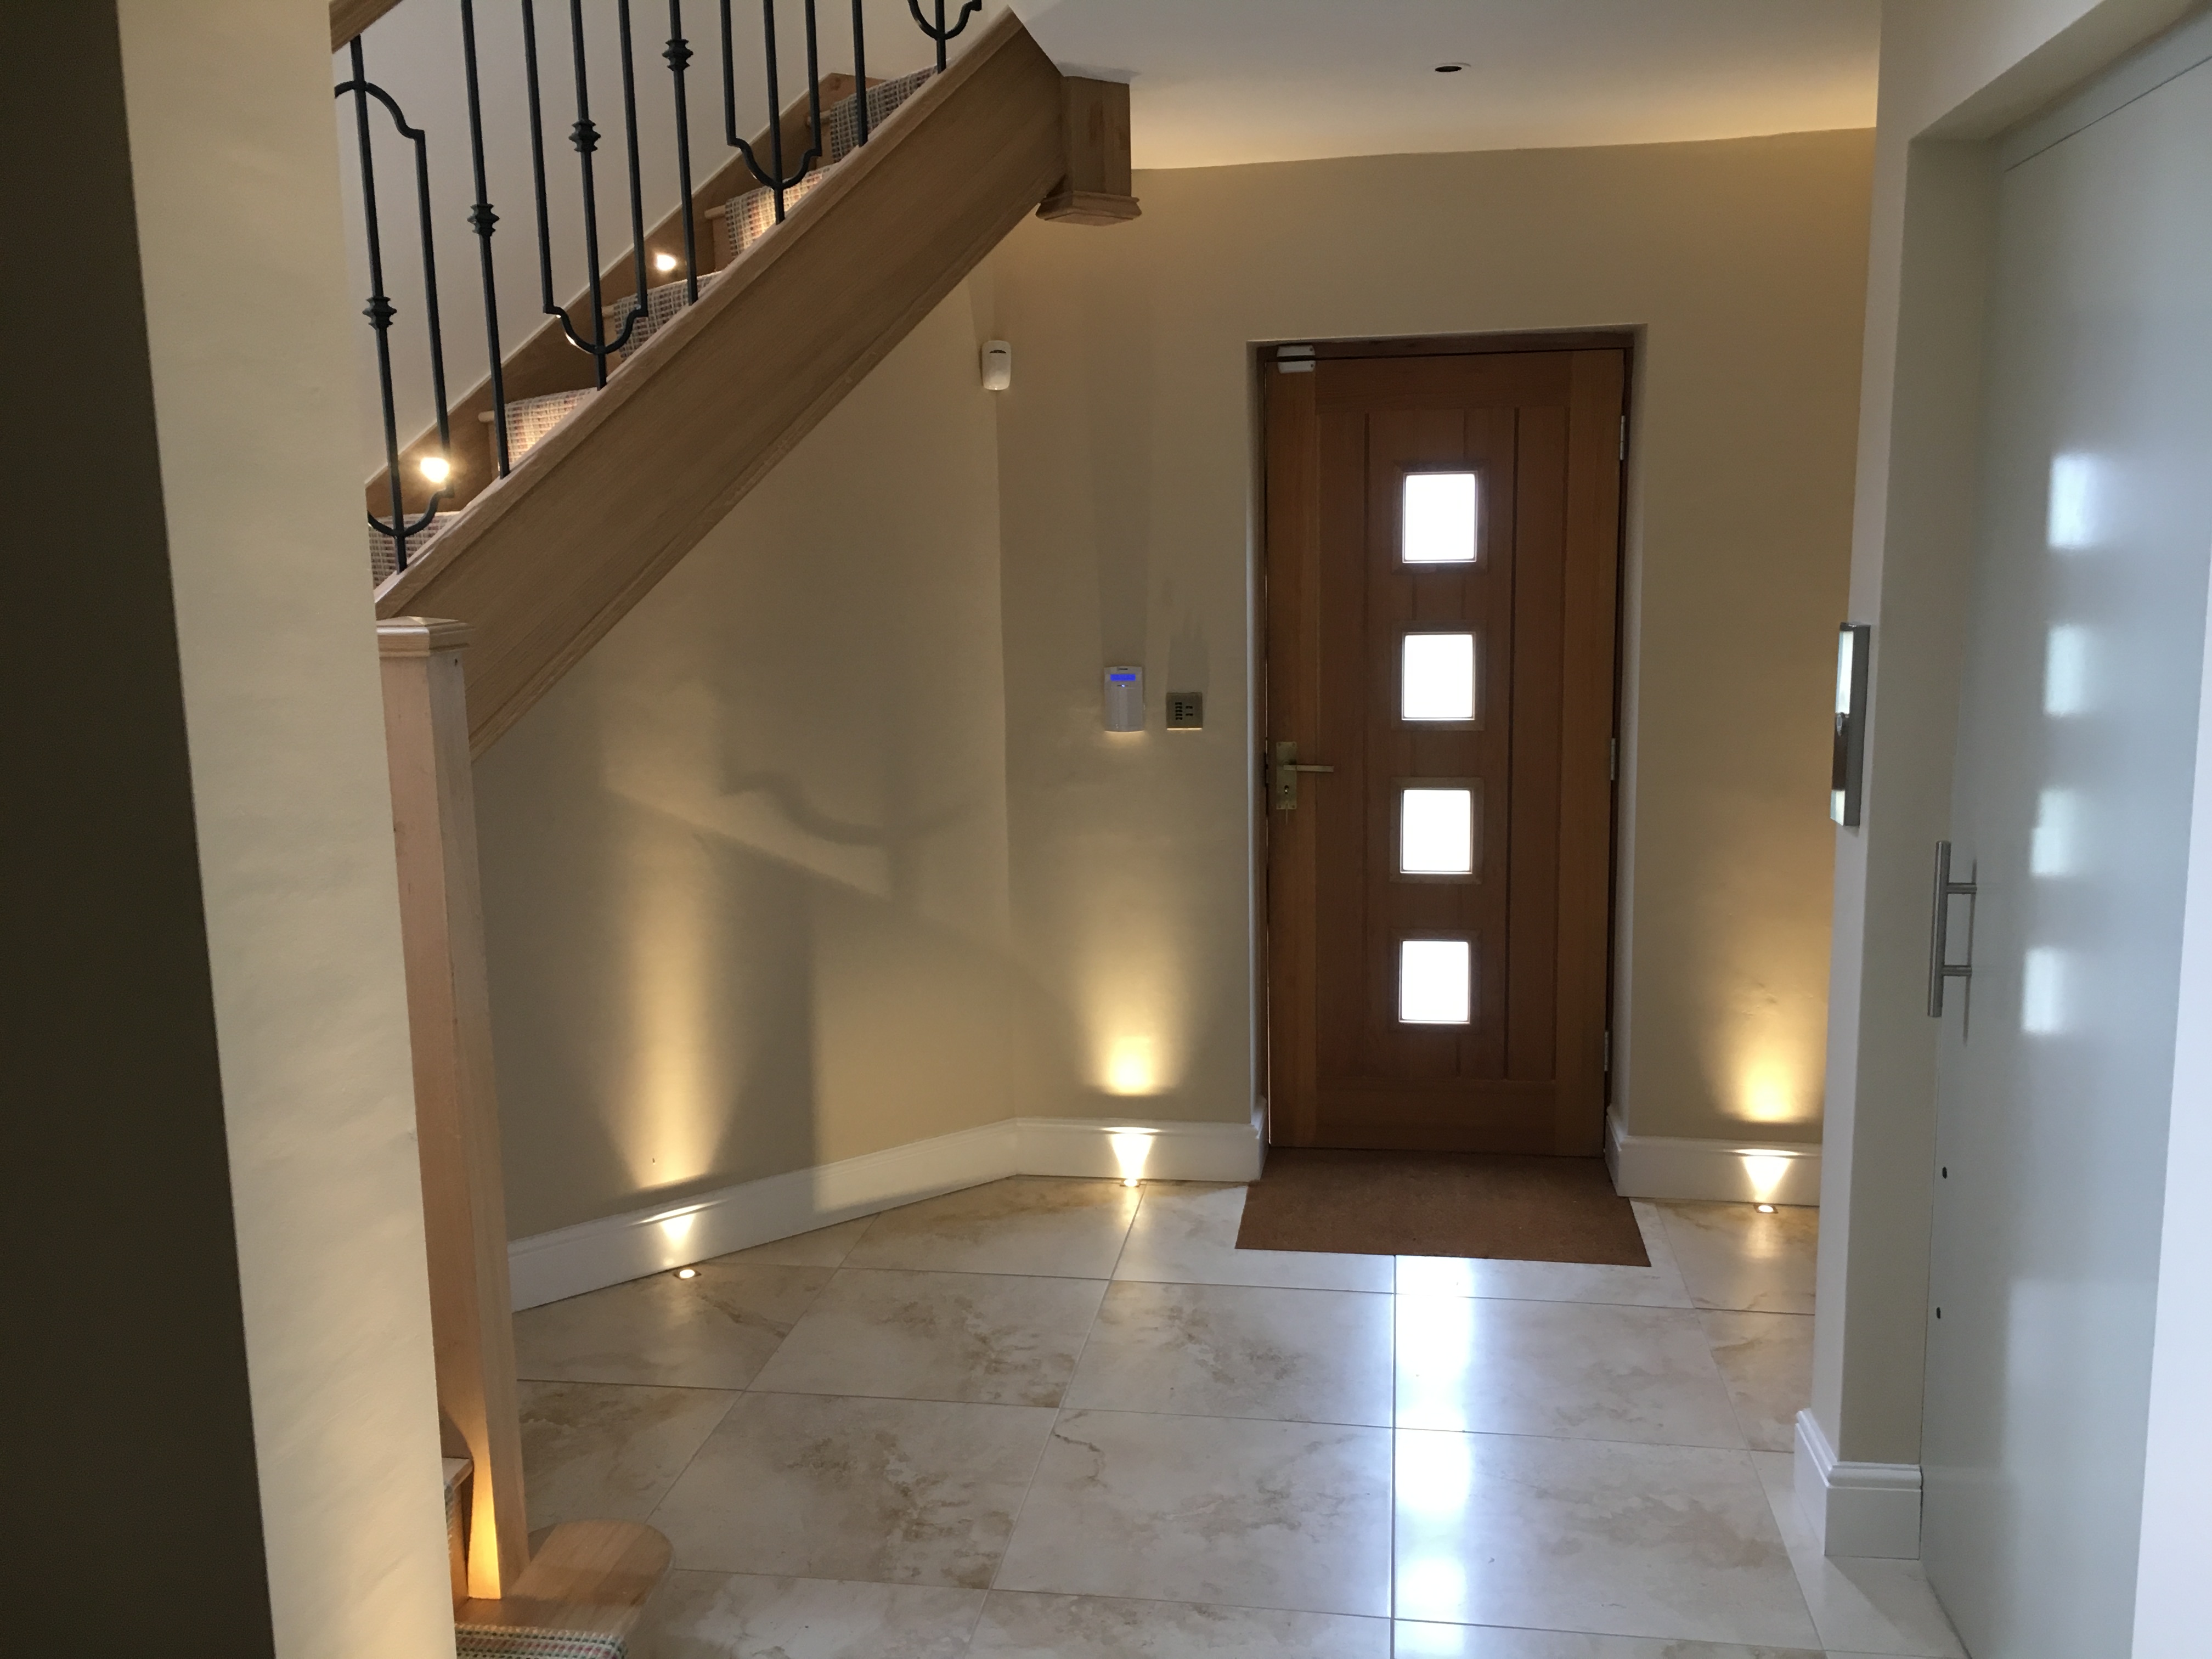 Entrance Hall Lighting Installation in Ely